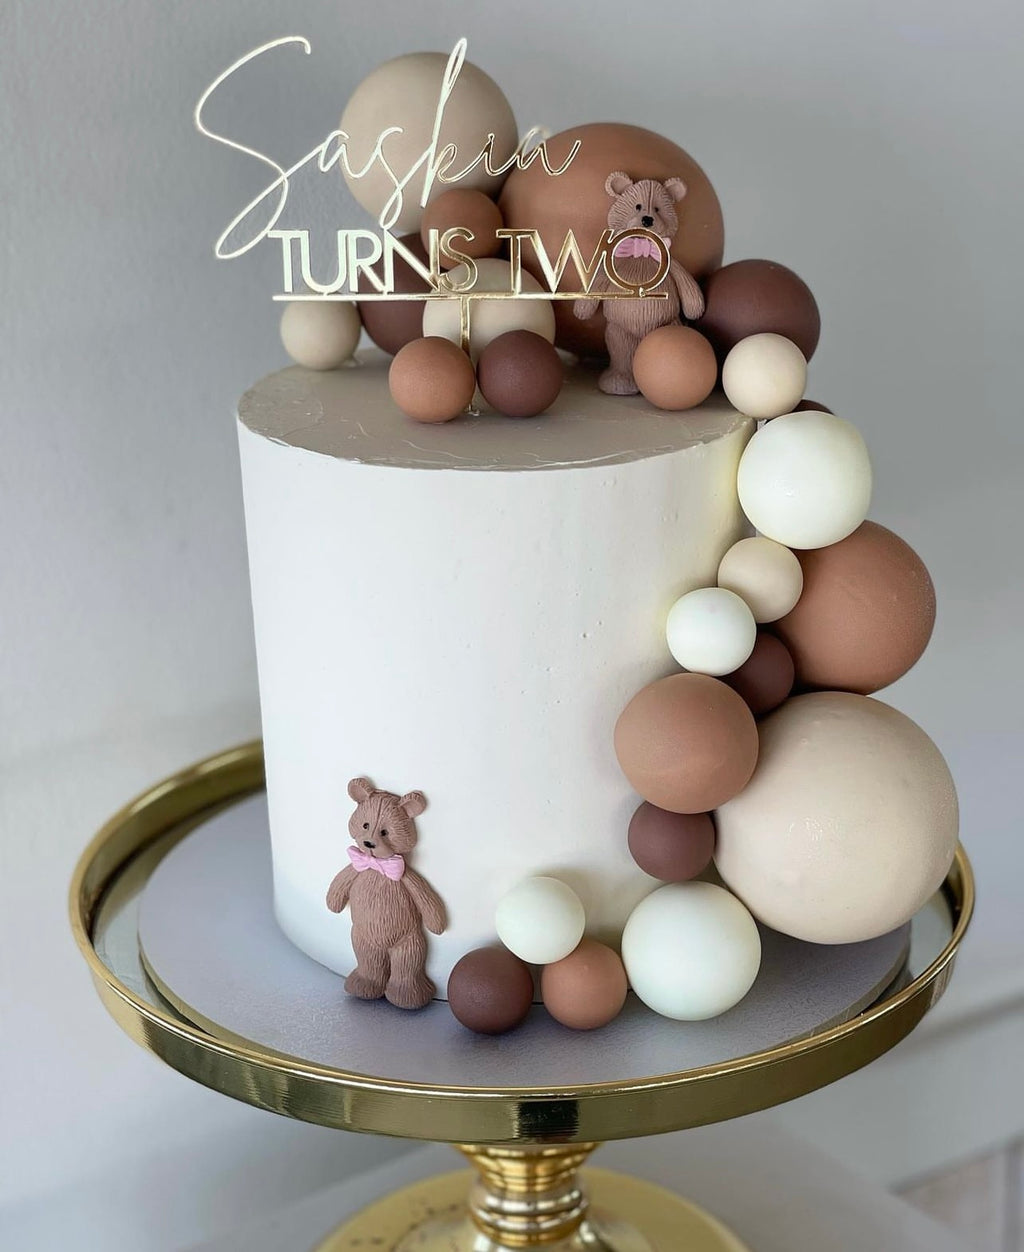 Cakes and Teddy Online | Cake and Teddy Bear Combo Gifts Same Day Delivery